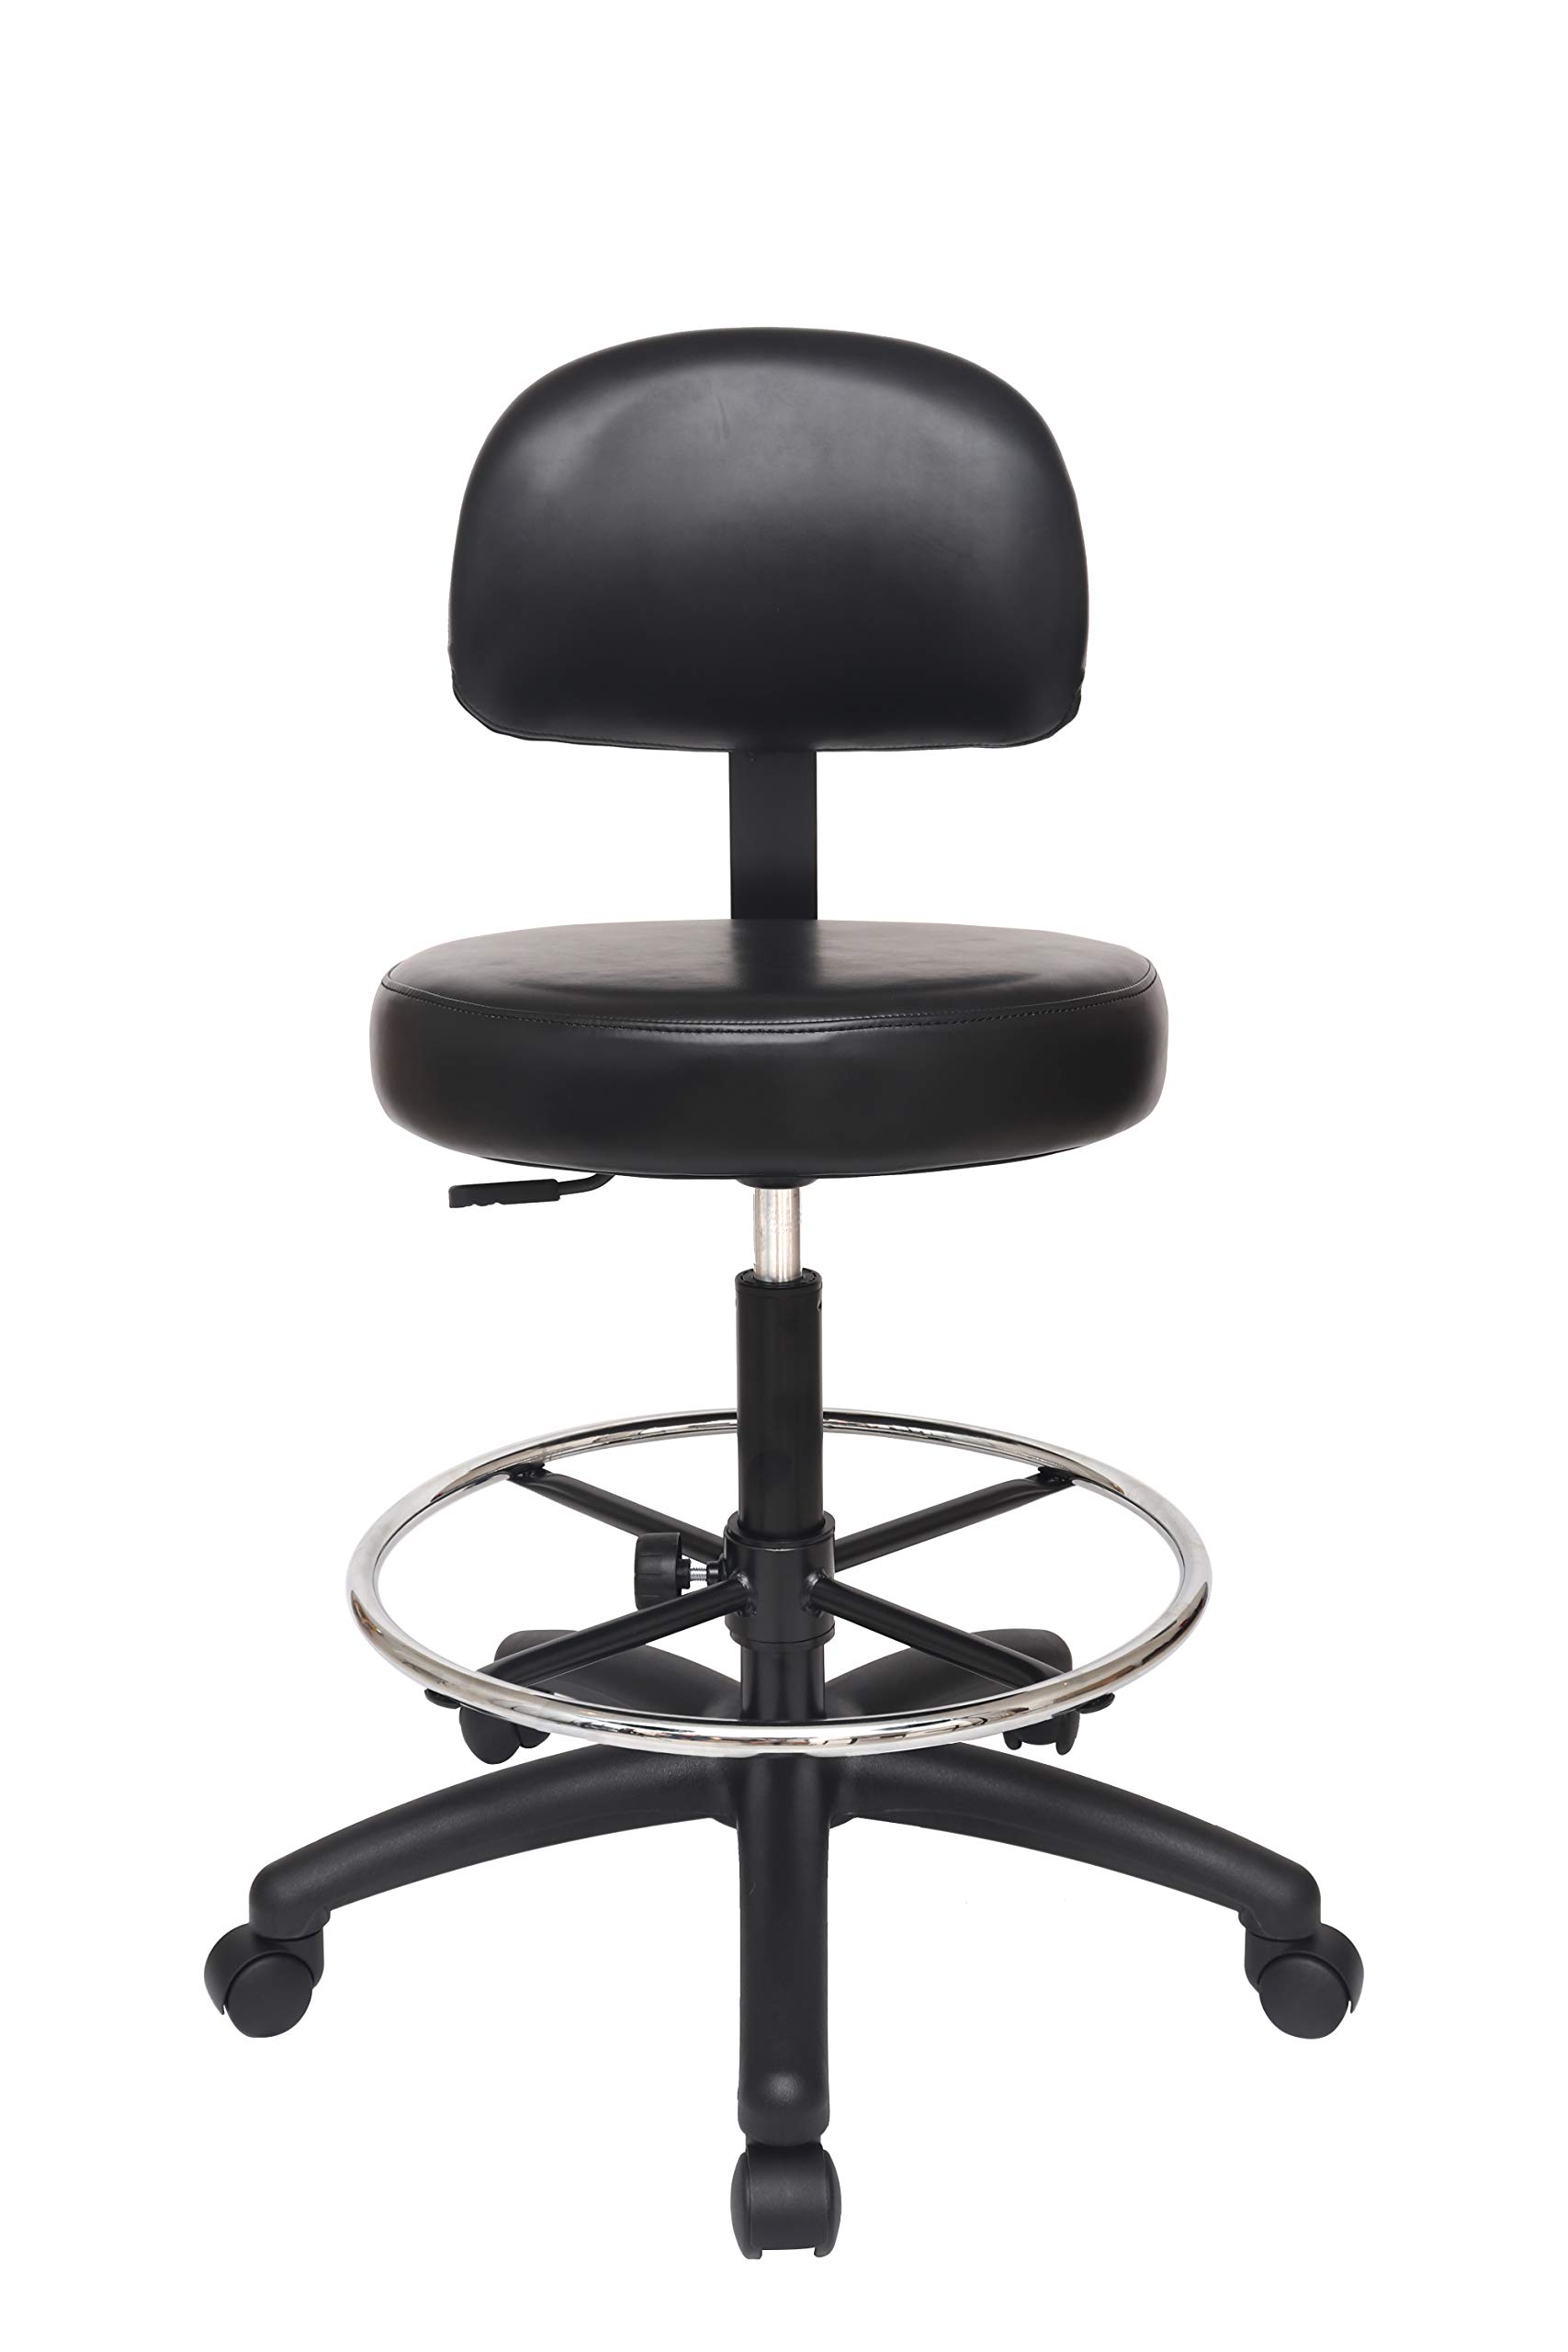 Chair Master Adjustable Chair/Stool for Exam Rooms, Labs, Doctor and Dentist Offices. Easy to Clean! 24"-34" Seat Height. 18" Foot Ring (Tall Bench Height, Black)